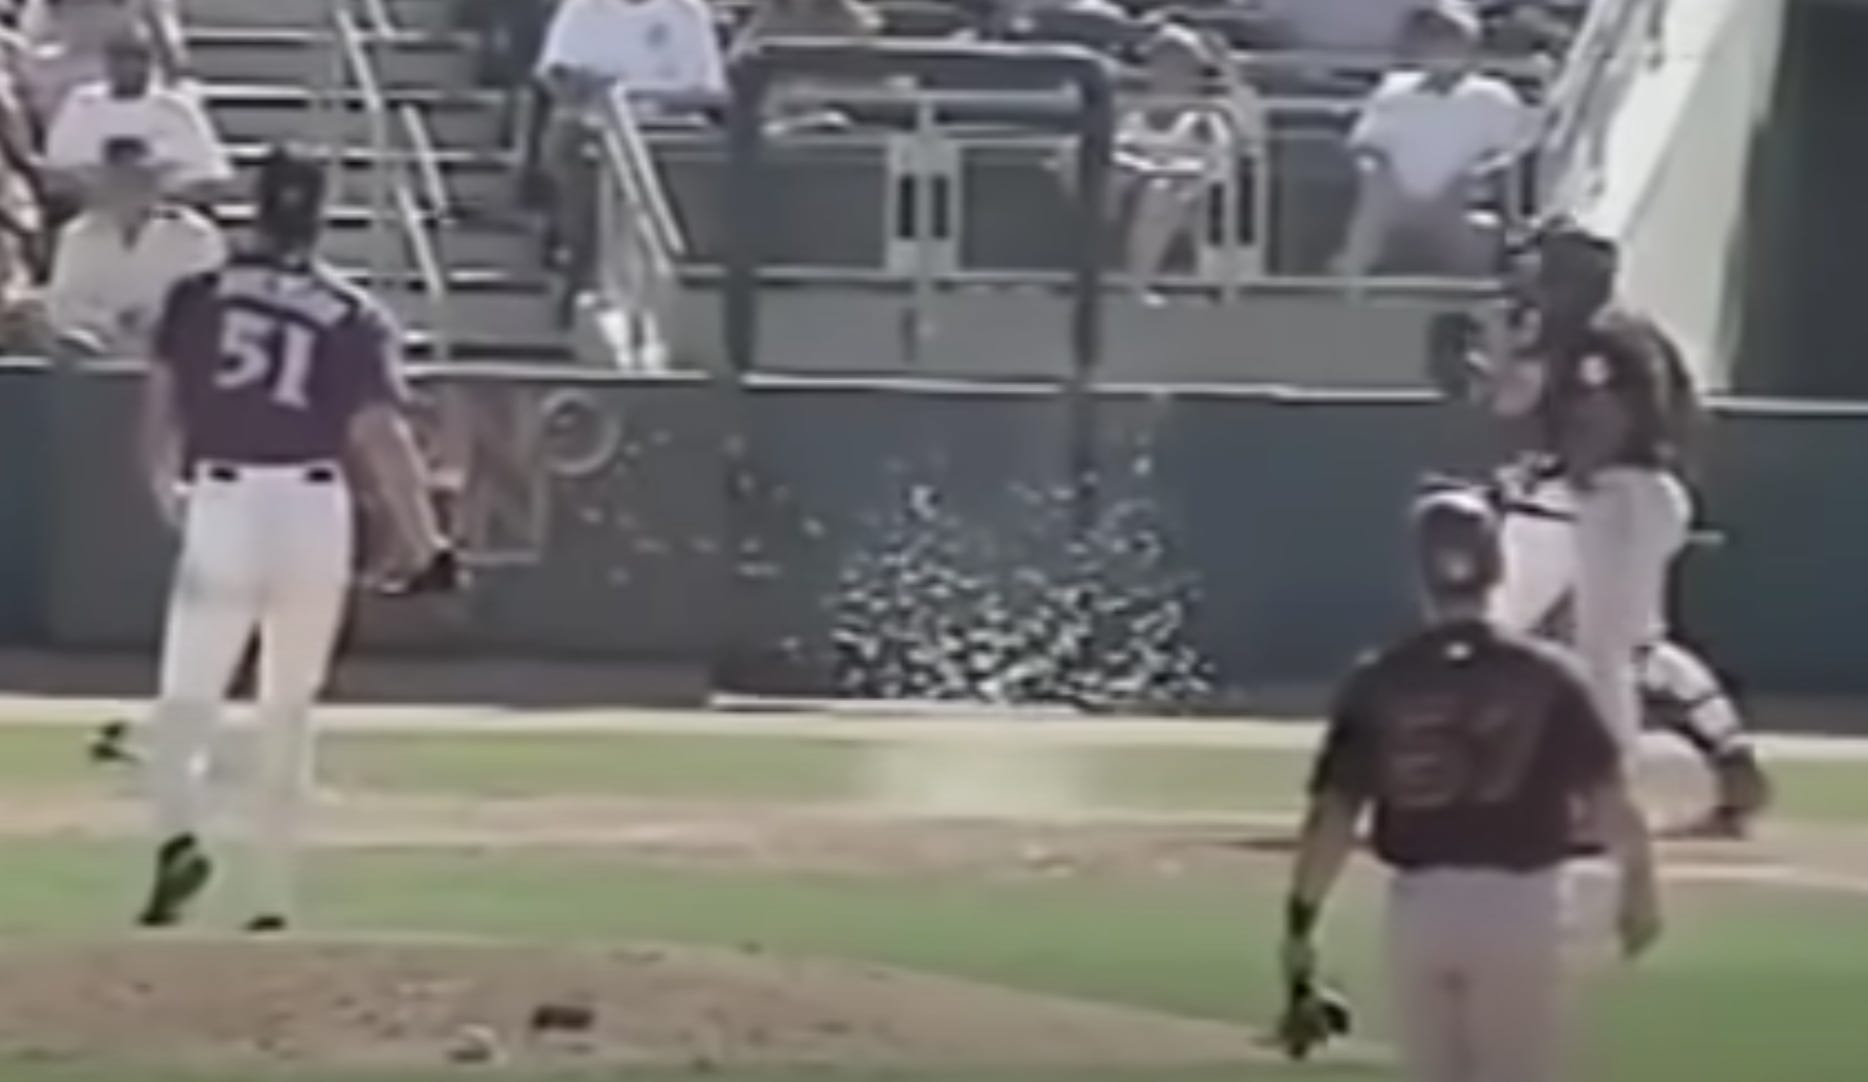  Major League Baseball - Bird 'explodes' after flying in